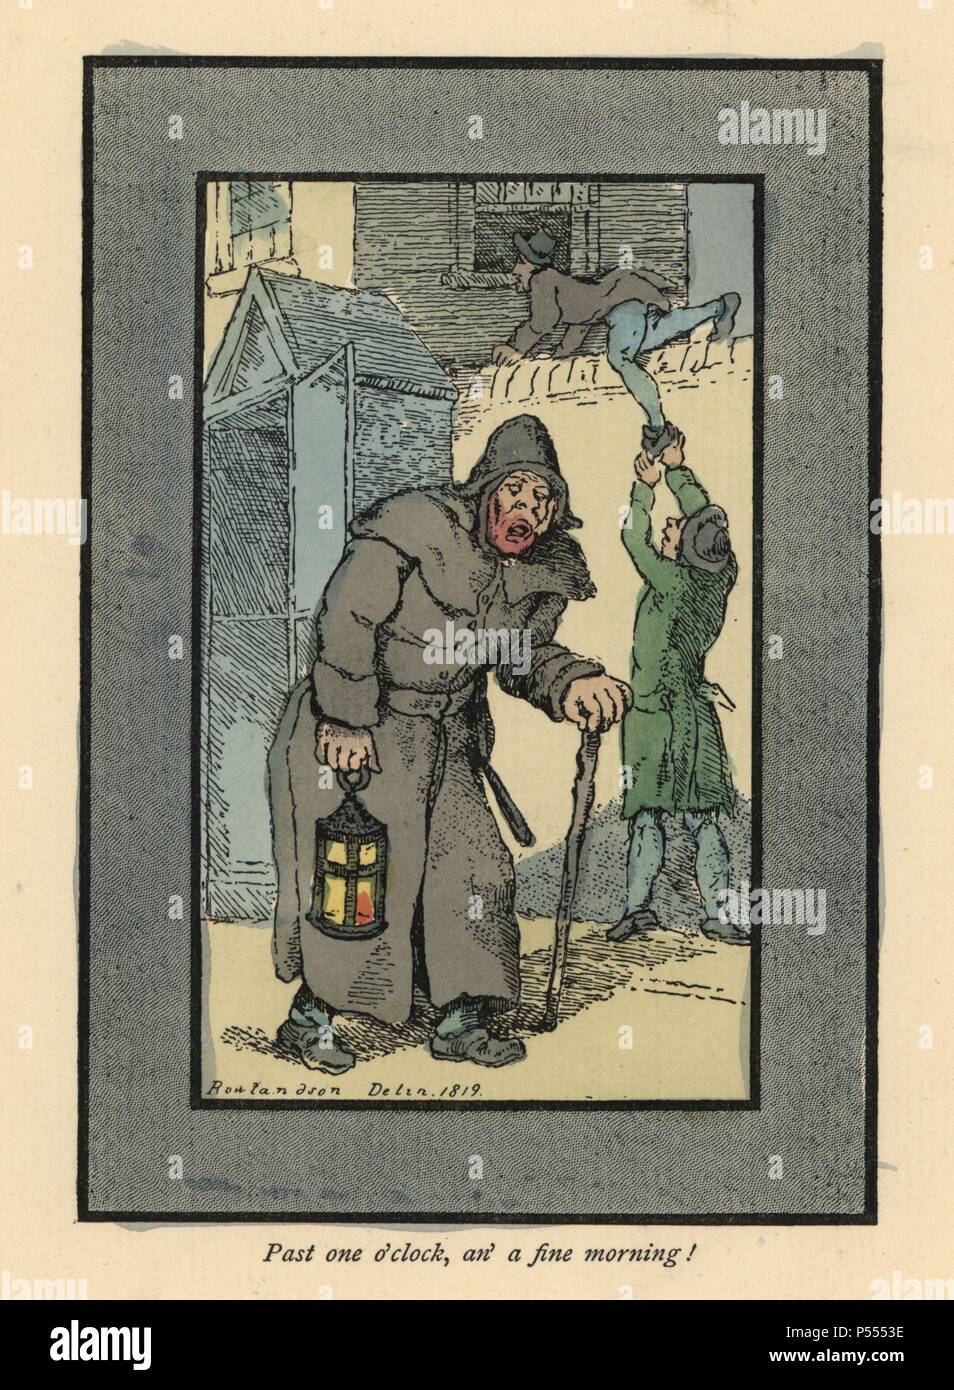 Night watchman with lantern and stick oblivious to two burglars breaking into a house behind him (1819). Handcoloured woodblock engraving after an original painting by Thomas Rowlandson (1756-1827) from Andrew Tuer's 'London Cries: with Six Charming Children and about forty other illustrations,' published by Field & Tuer, London, 1883. Stock Photo